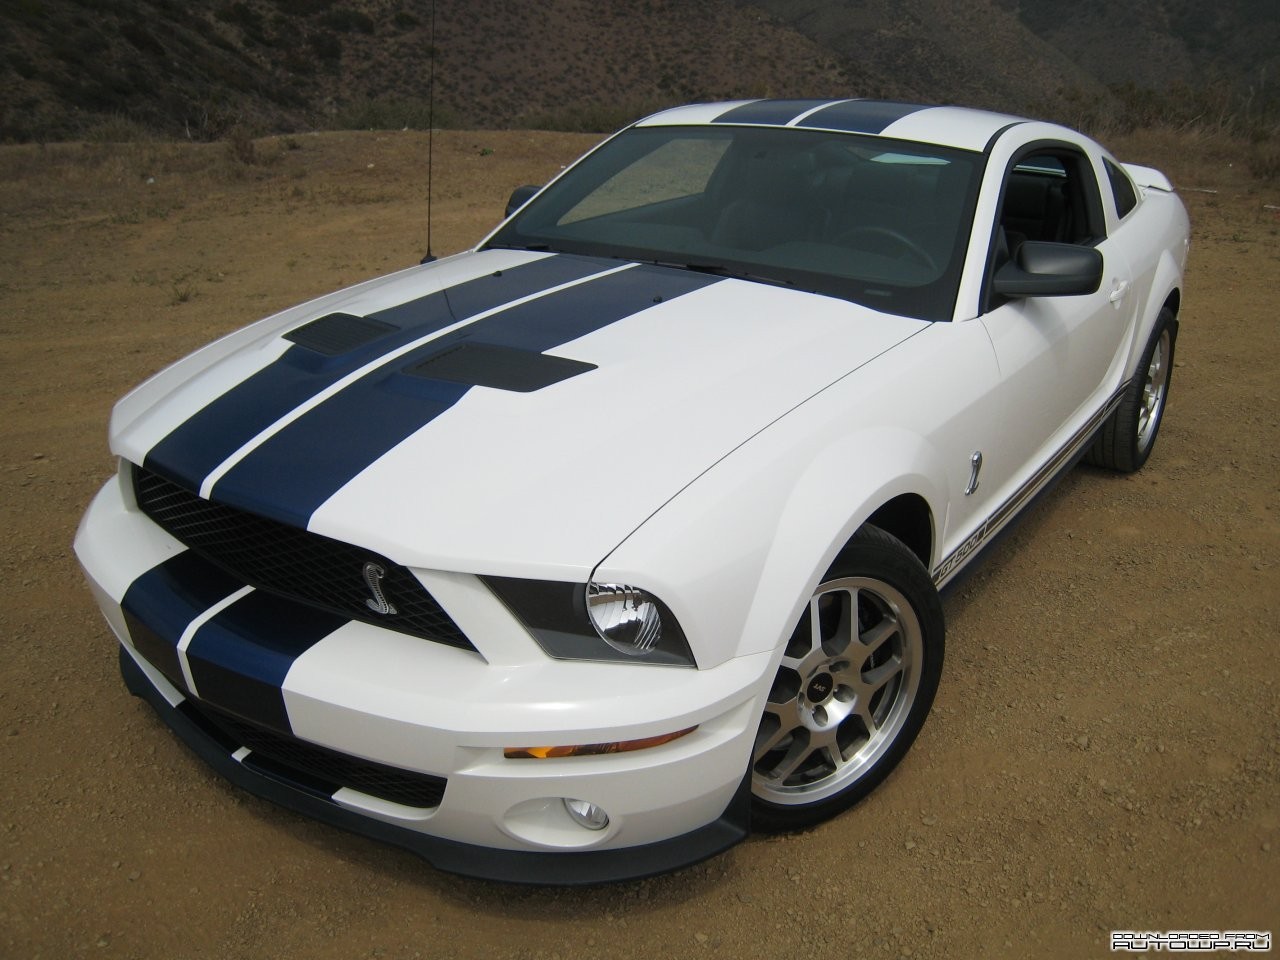 General 1280x960 car Ford Mustang vehicle white cars Ford Ford Mustang S-197 muscle cars racing stripes American cars